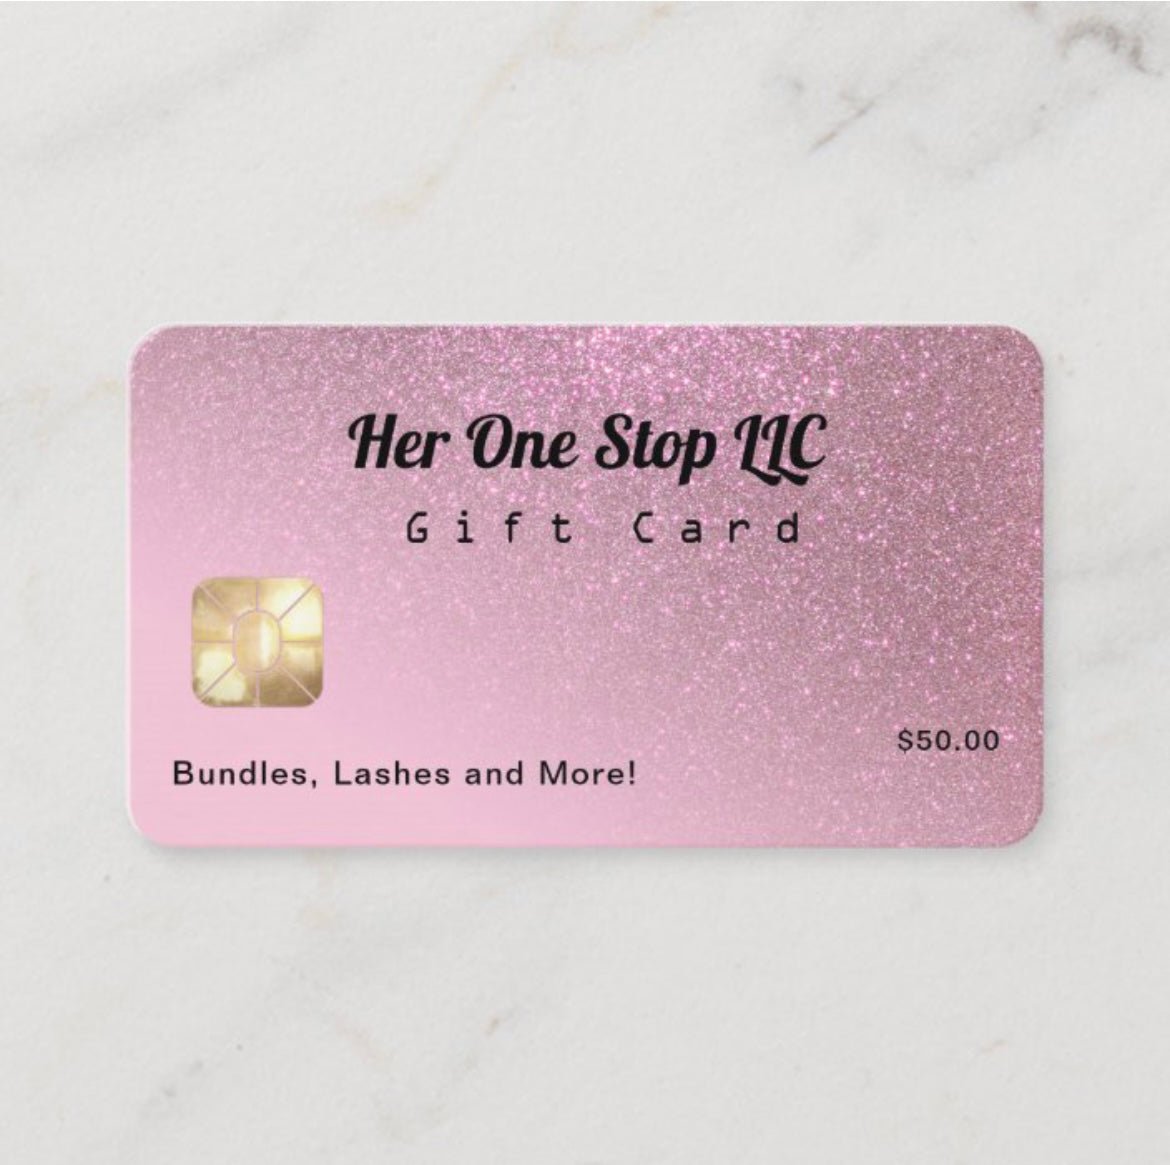 Gift Cards - Her One Stop LLC 